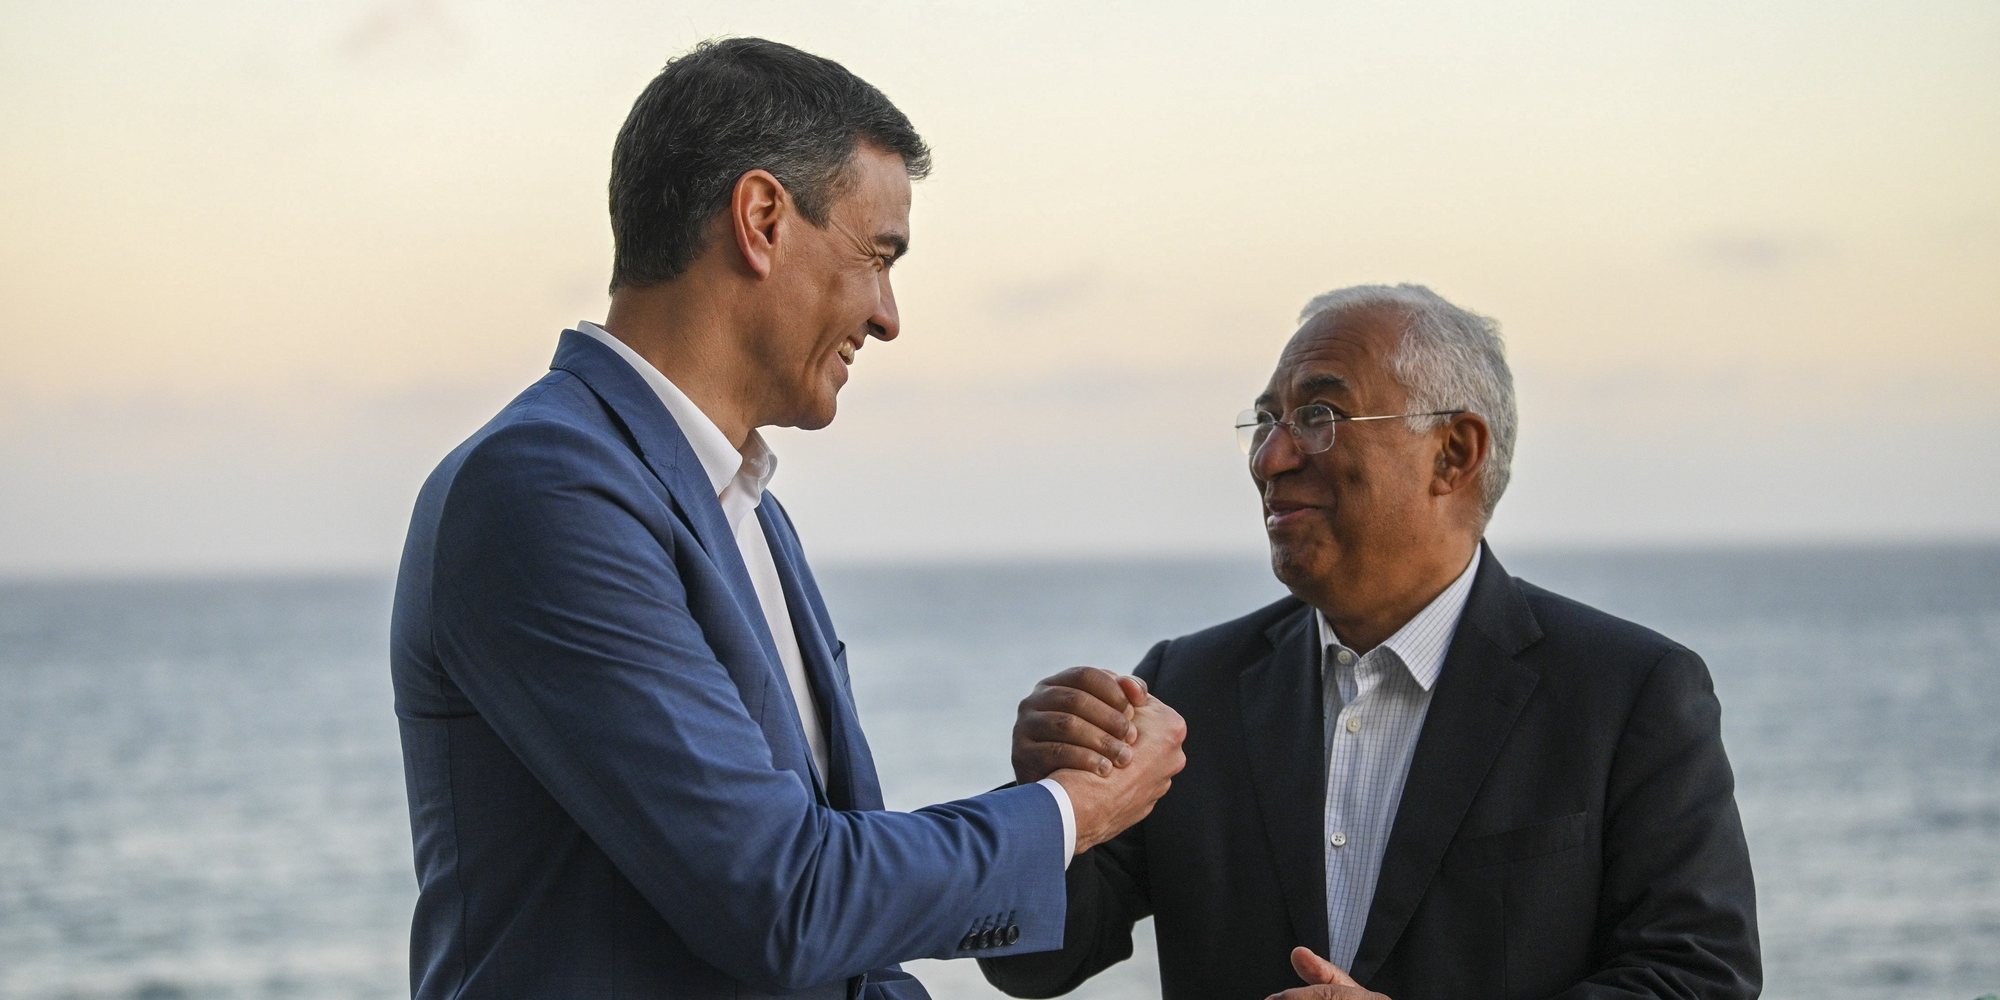 Spanish Primer Minister Pedro Sanchez (L) and Portuguese counterpart Antonio Costa (R) as they honor the late Portuguese writer during the centenary of his birth, in Tias, Lanzarote, Canary Islands, Spain, 14 March 2023. Costa is in Spain to attend the Spanish-Portuguese summit to be held in Lanzarote island on 15 March 2023. EFE/POOL/ Moncloa/Borja Puig de la Bellacasa